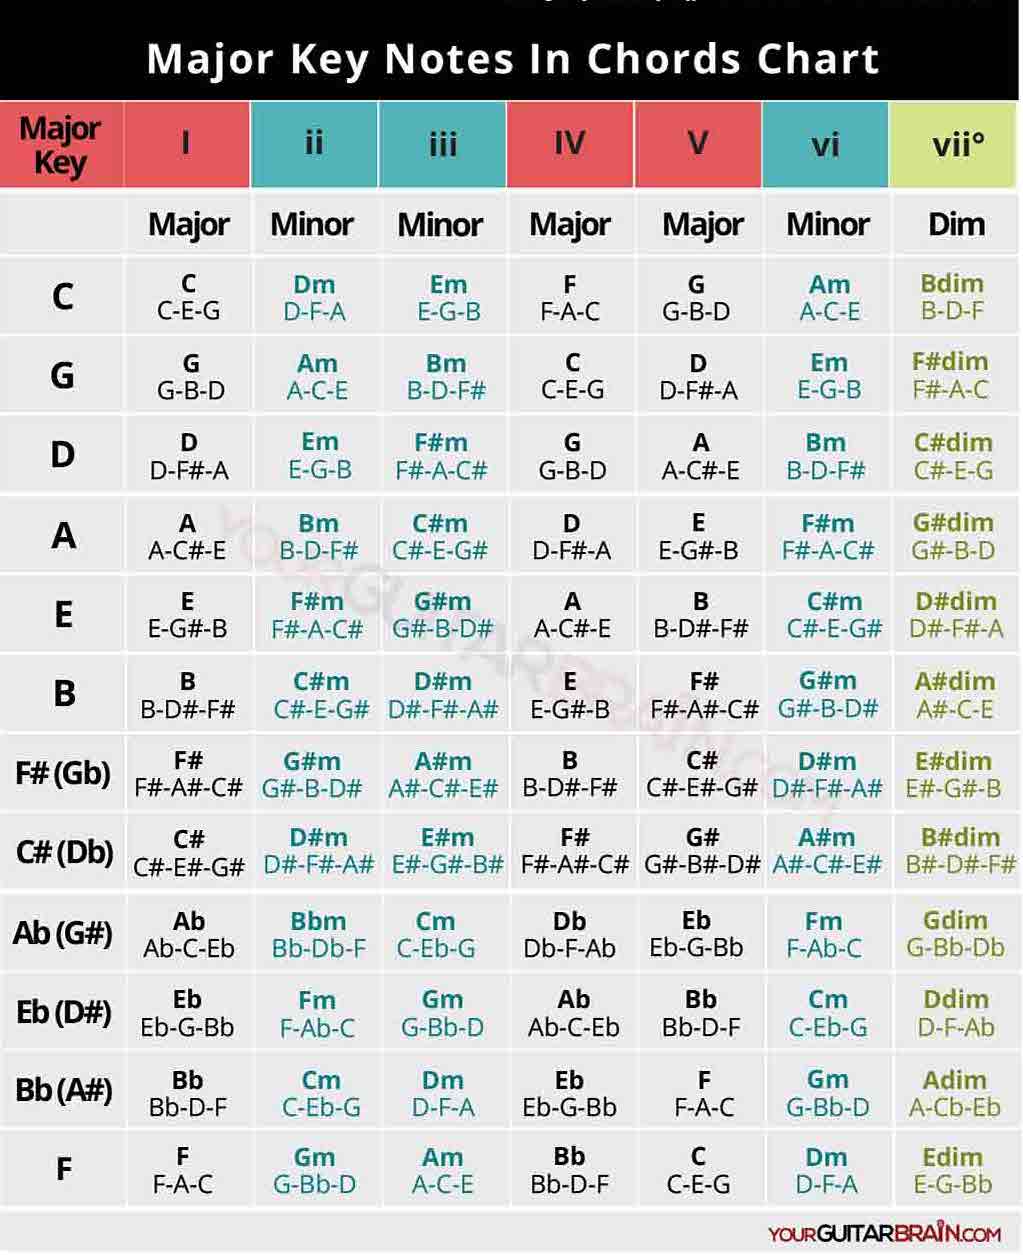 Major Key Chord Notes Notes Chart (Diatonic Triads) | Your Guitar Brain